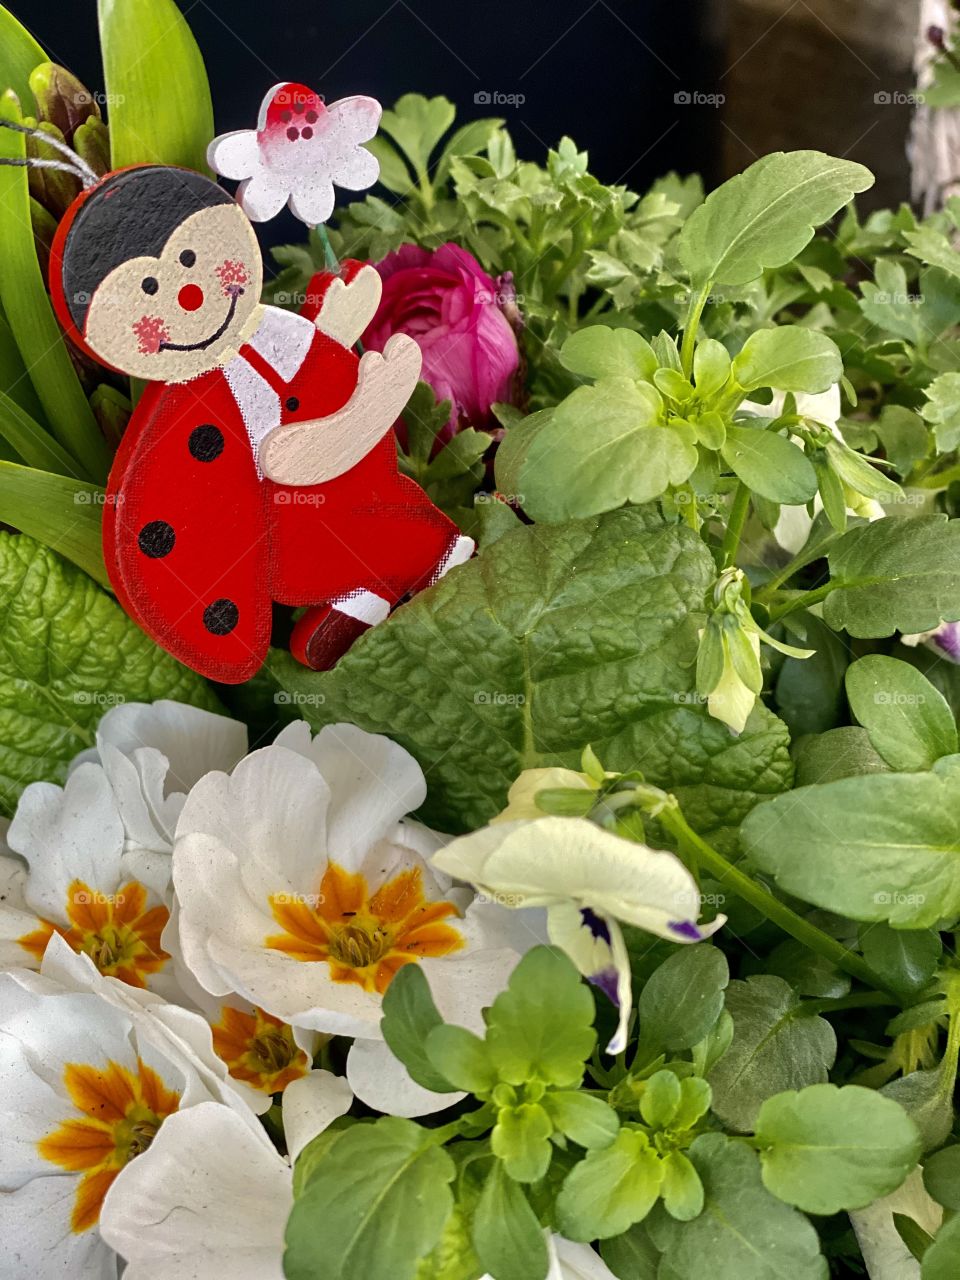 ladybug in flowers, decoration in flowers